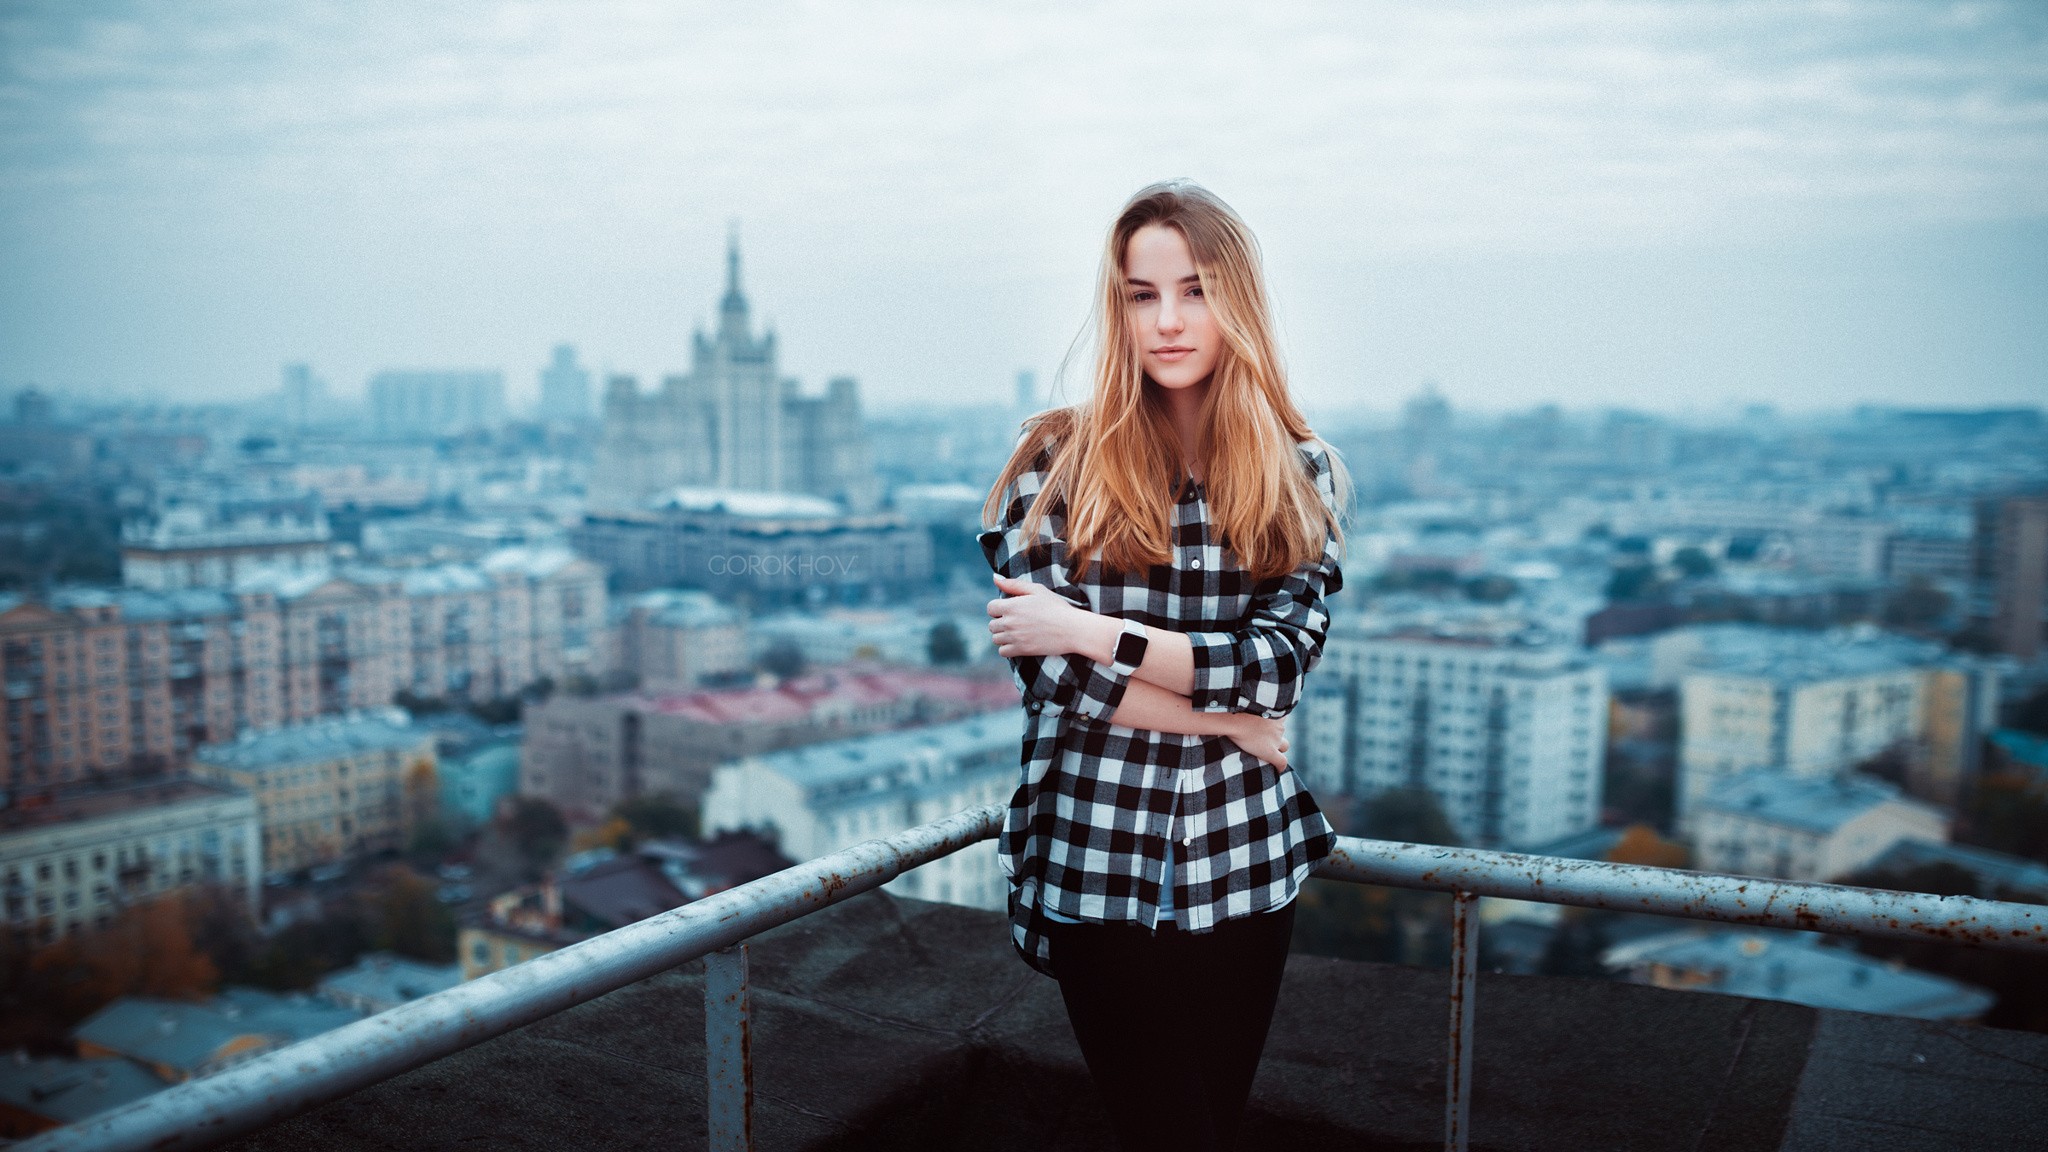 People 2048x1152 Maryana Ro women blonde model portrait cityscape Ivan Gorokhov plaid shirt arms crossed balcony rooftops Moscow standing black pants ombre hair hair in face watermarked Russia